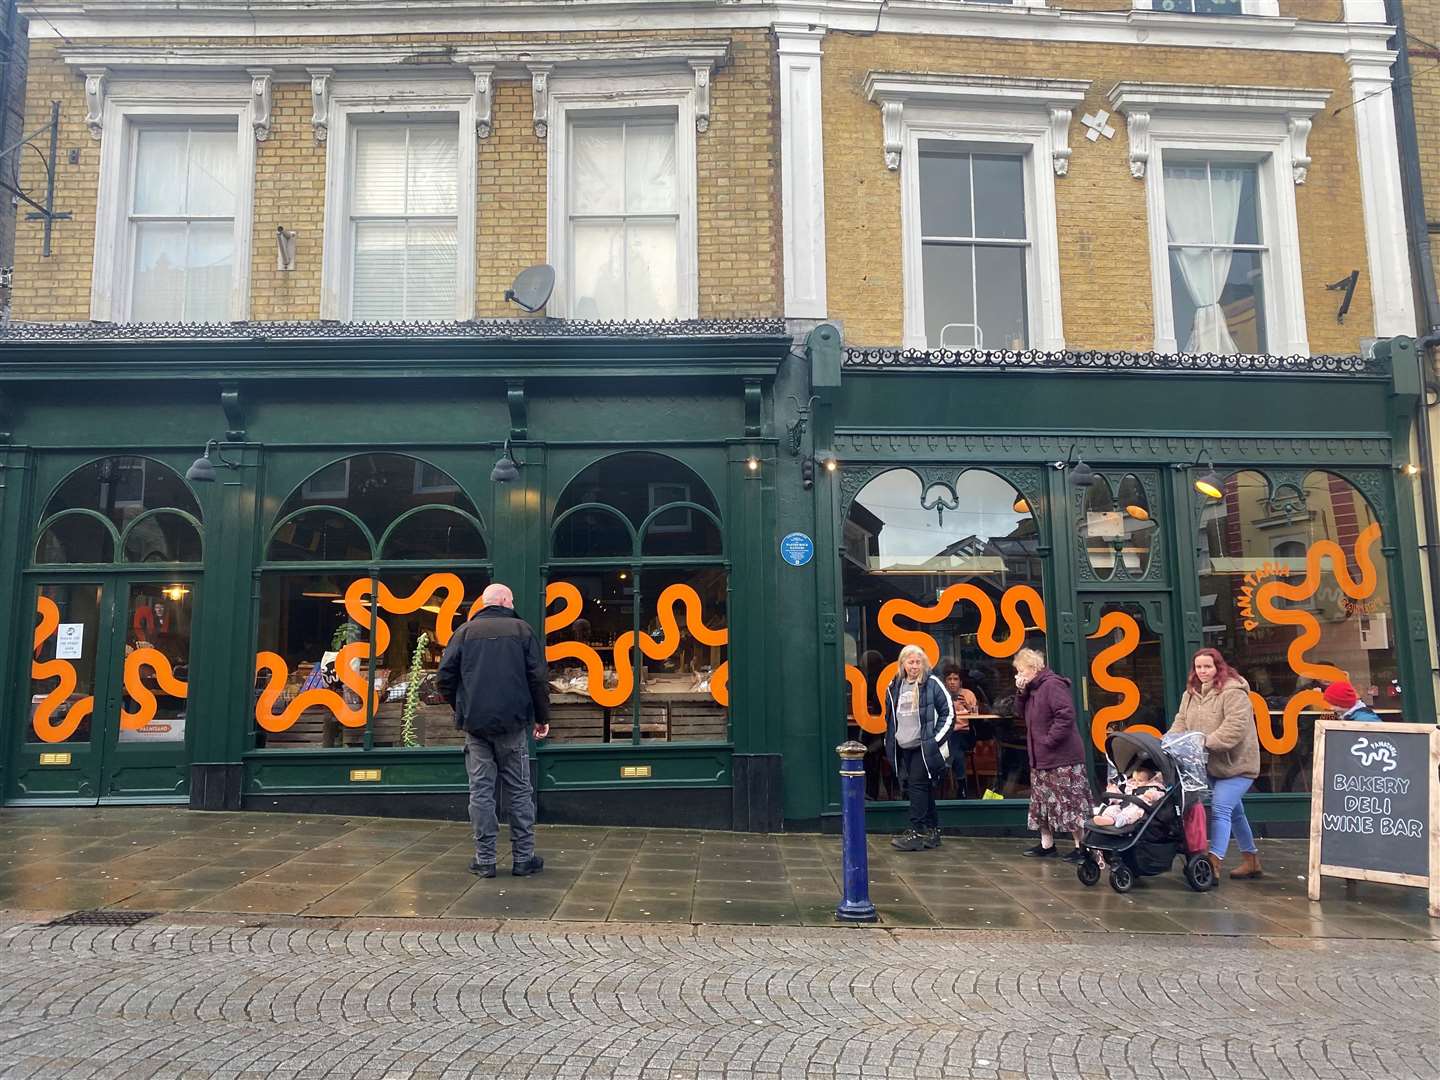 The former Punch & Judy pub has been transformed into a bakery and wine bar called Panataria